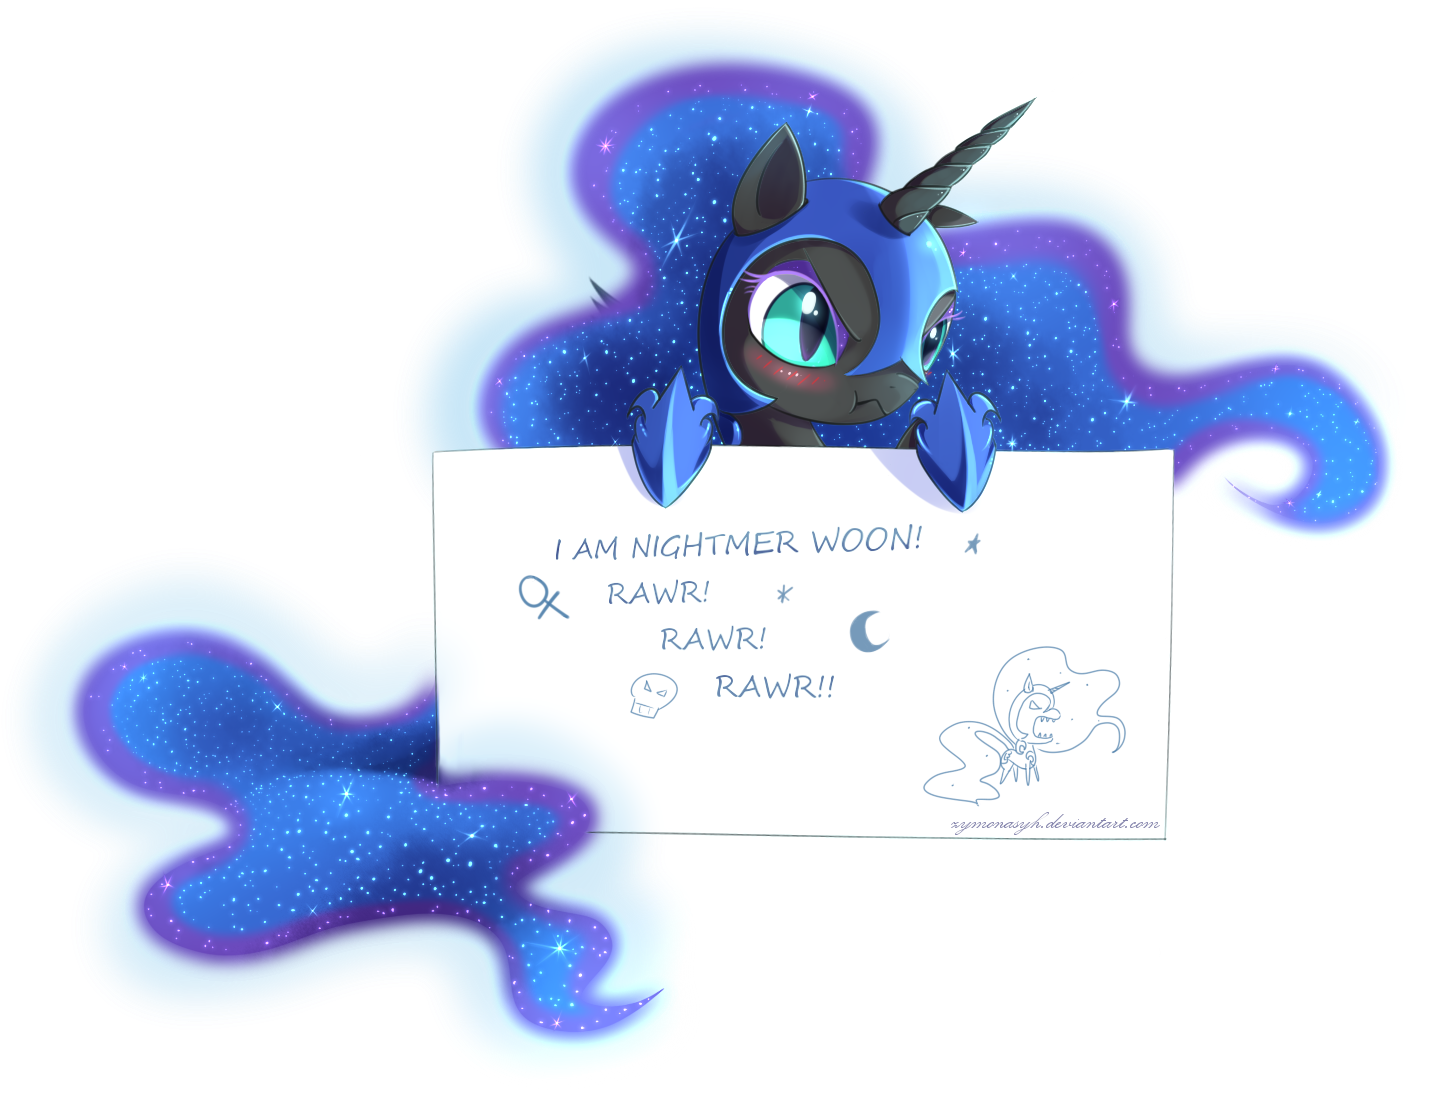 [Obrázek: nightmare_moon_message_by_zymonasyh-d5pf367.png]